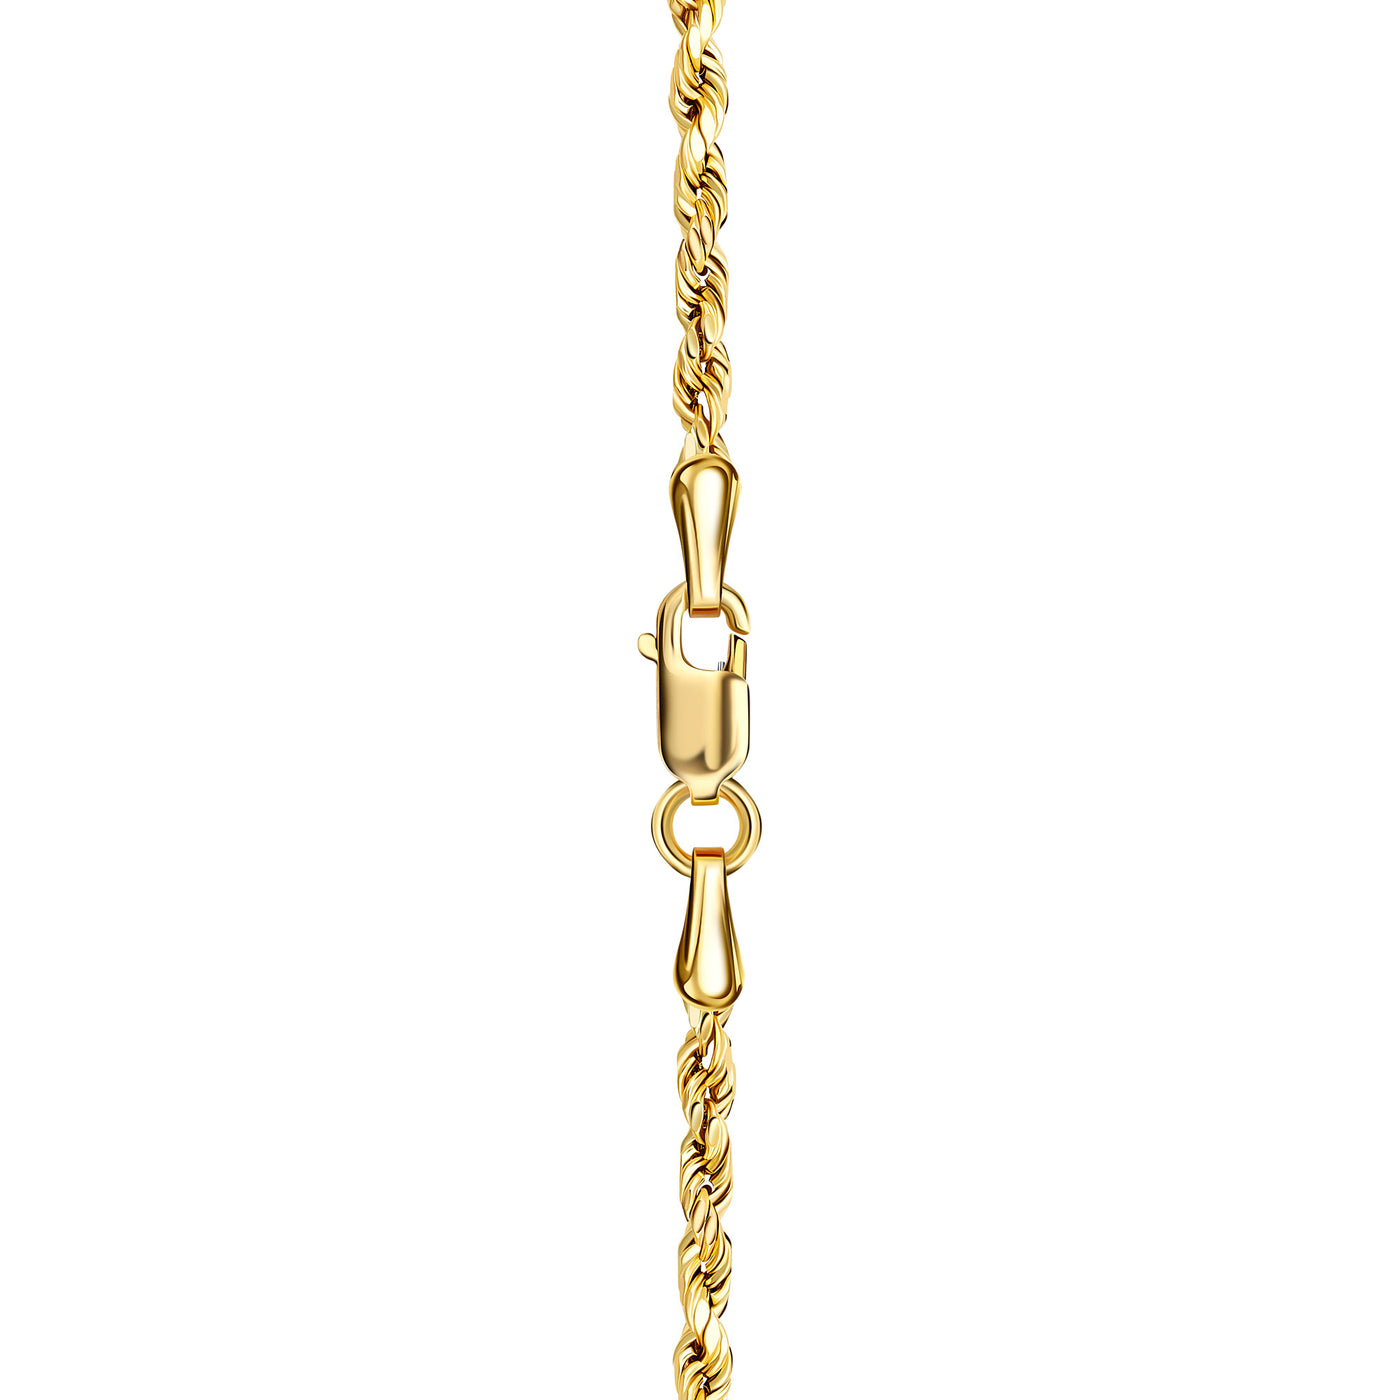 10K Gold Diamond Cut Rope Chain Necklace